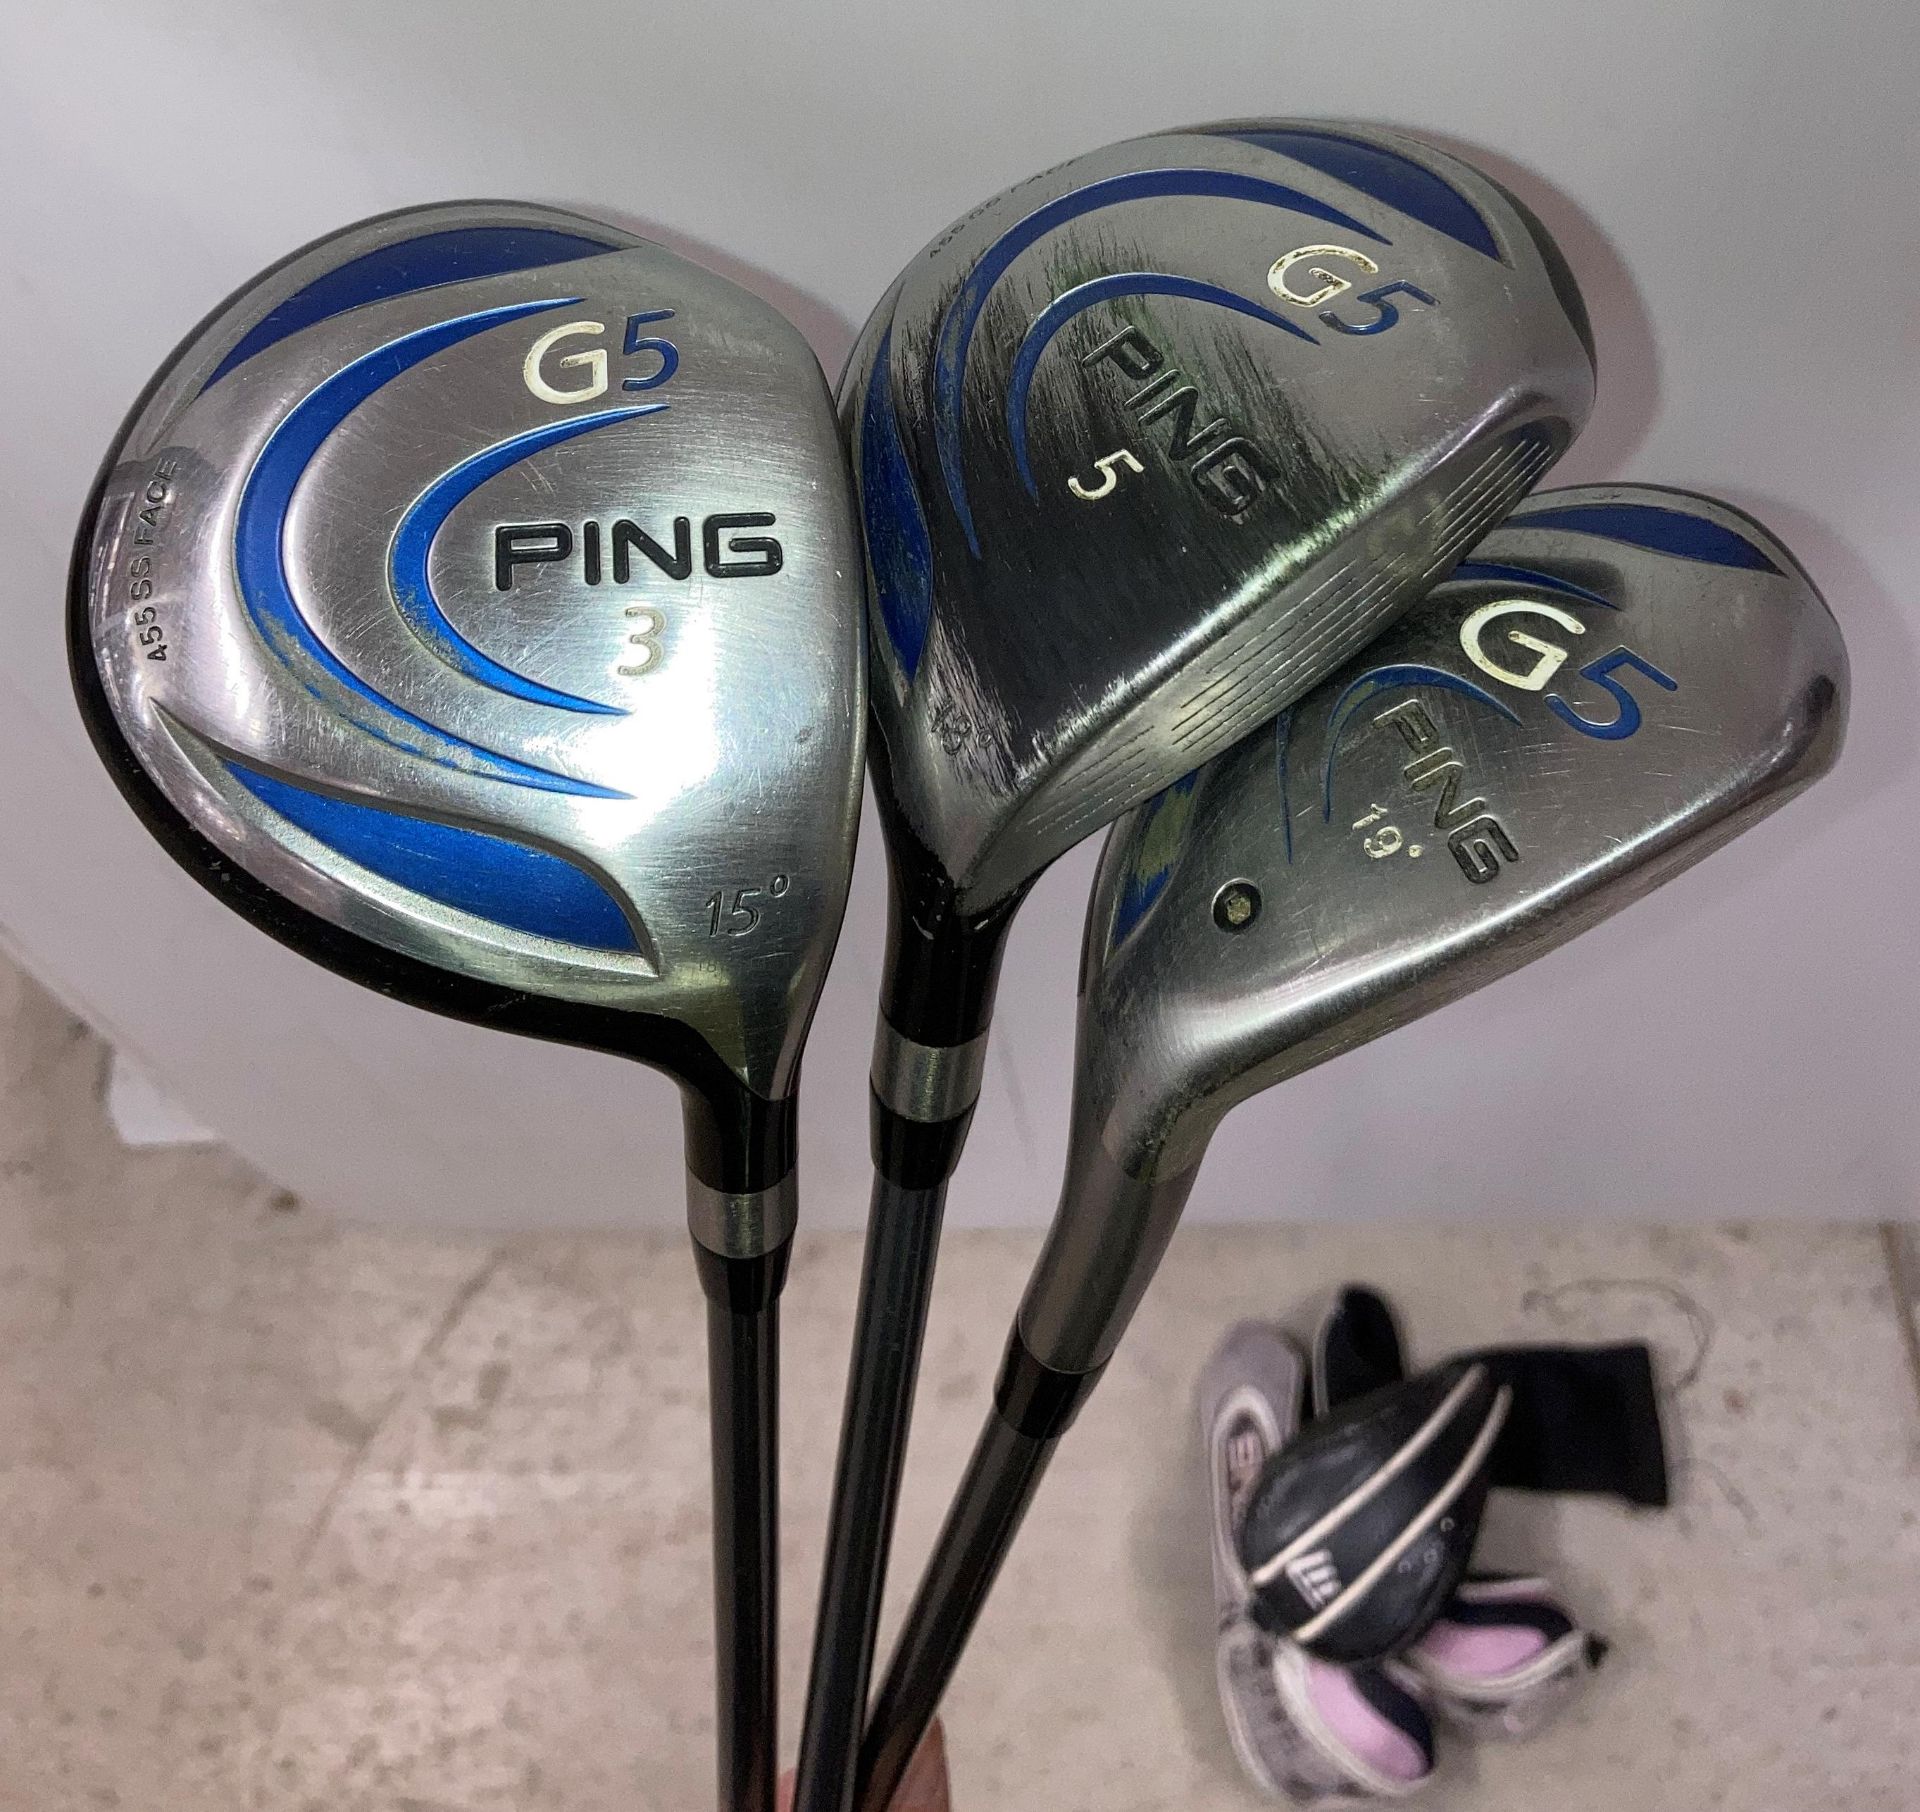 3 golf clubs by Ping - Ping G5, 3 and 5 metals, Ping G5 19 degree rescue club, - Bild 2 aus 2